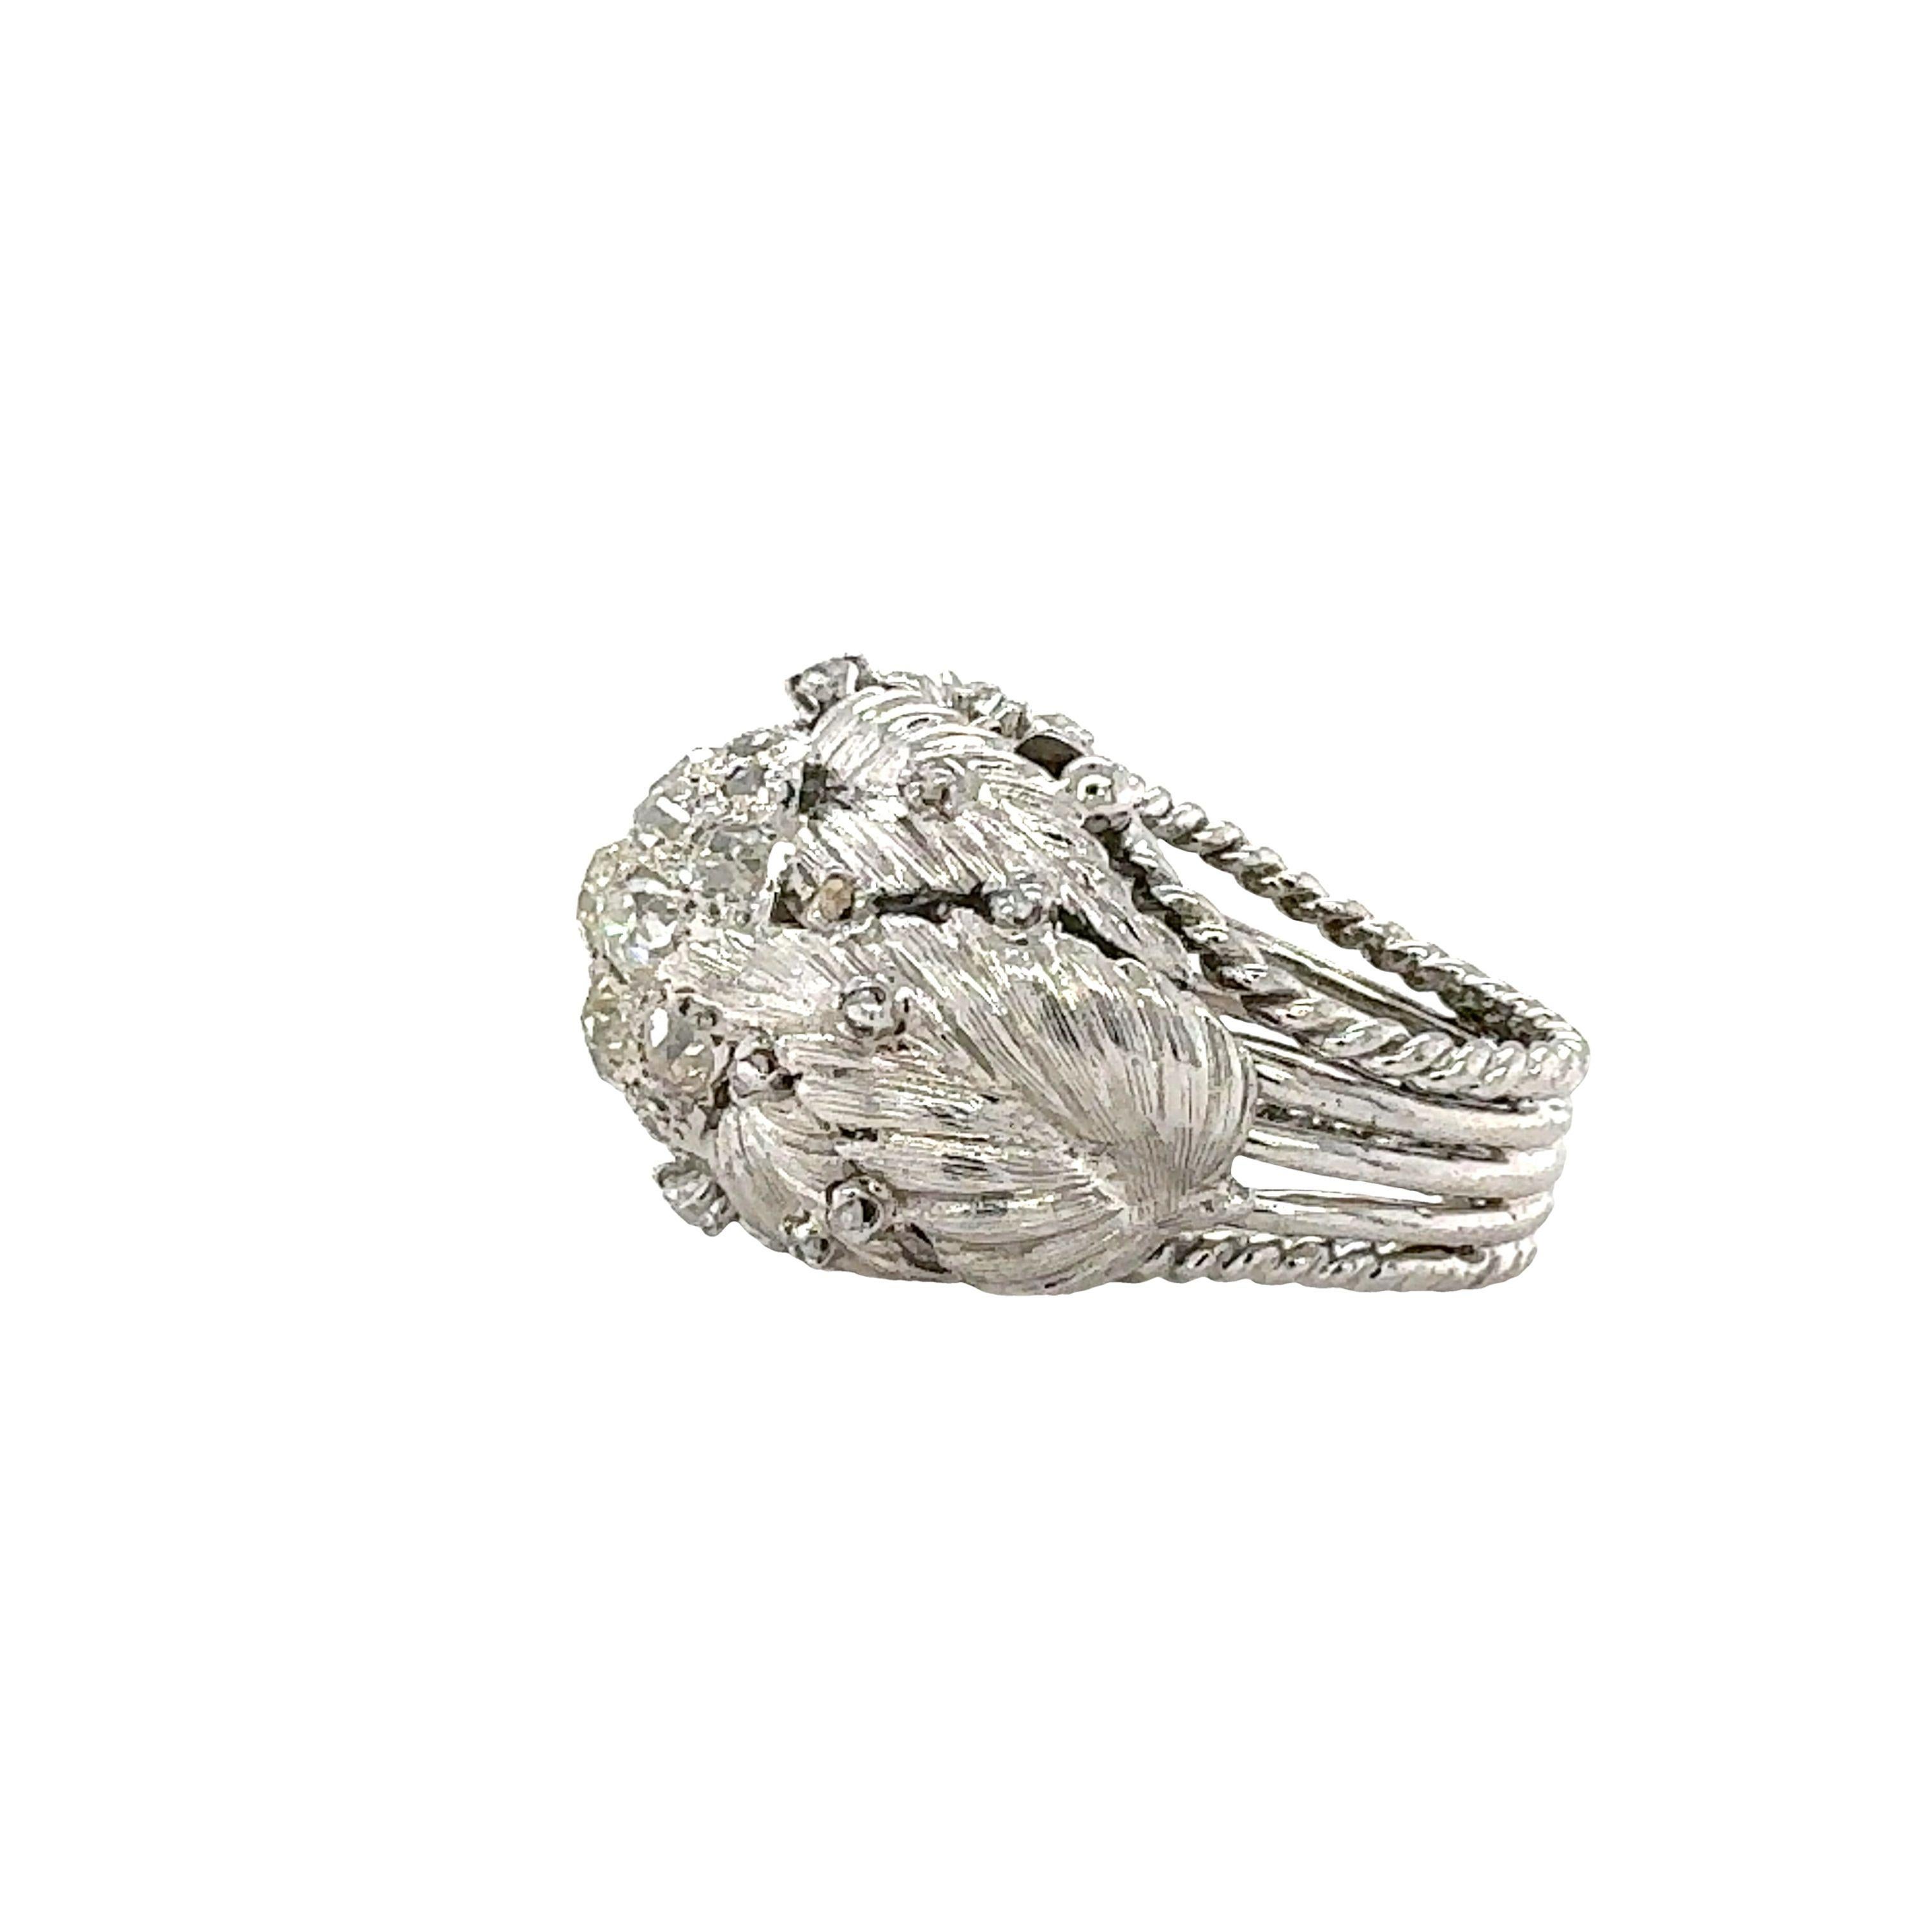 One mid-century diamond cluster, leaf and floral motif designer ring in 14K white gold featuring 39 old mine cut and rose cut diamonds totaling 1.42 ct. with J-K color and VS-2 clarity. 20 millimeters wide at top portion (north to south)

Metal: 14K